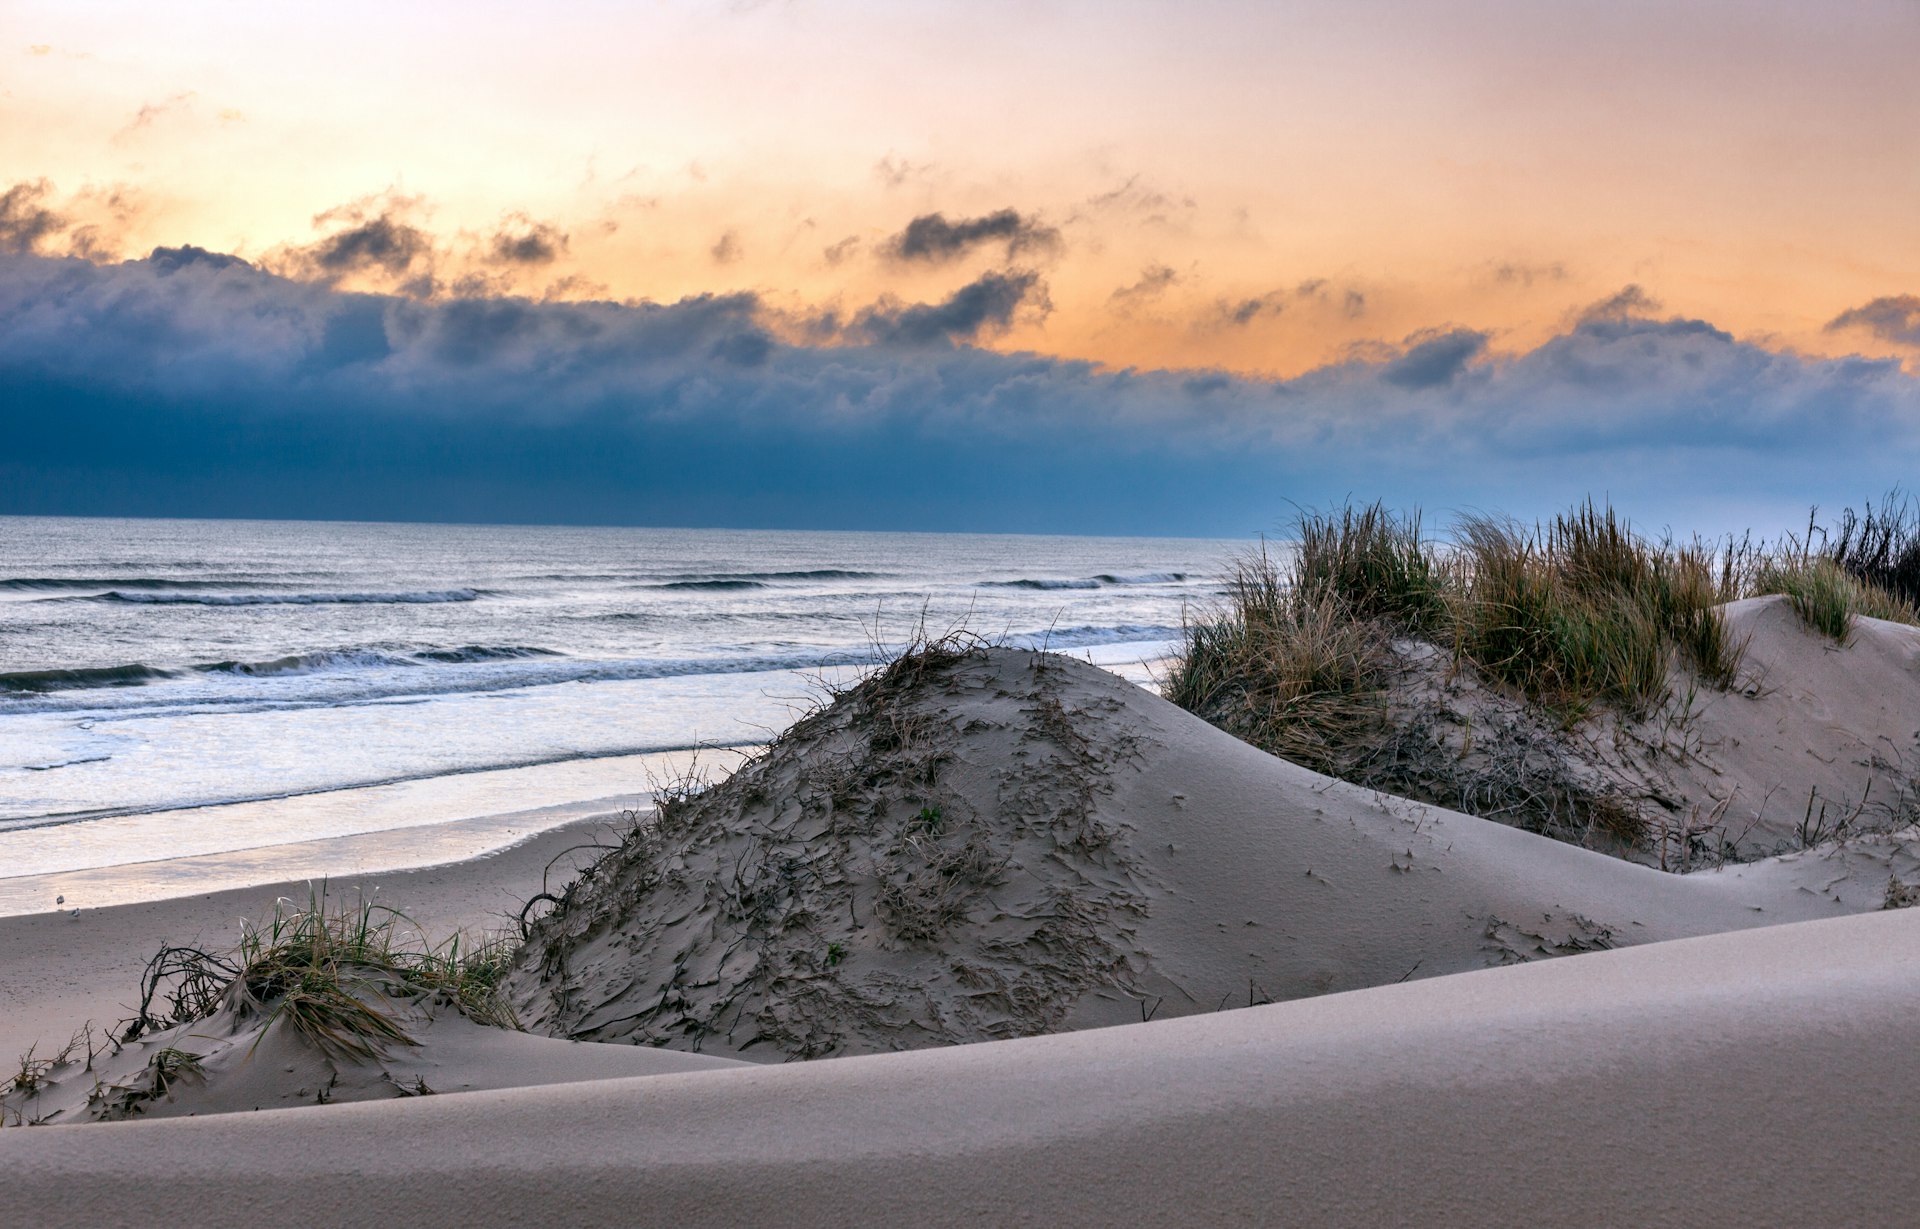 Sand dunes during a winter sunrise on a beach in the Outer Banks